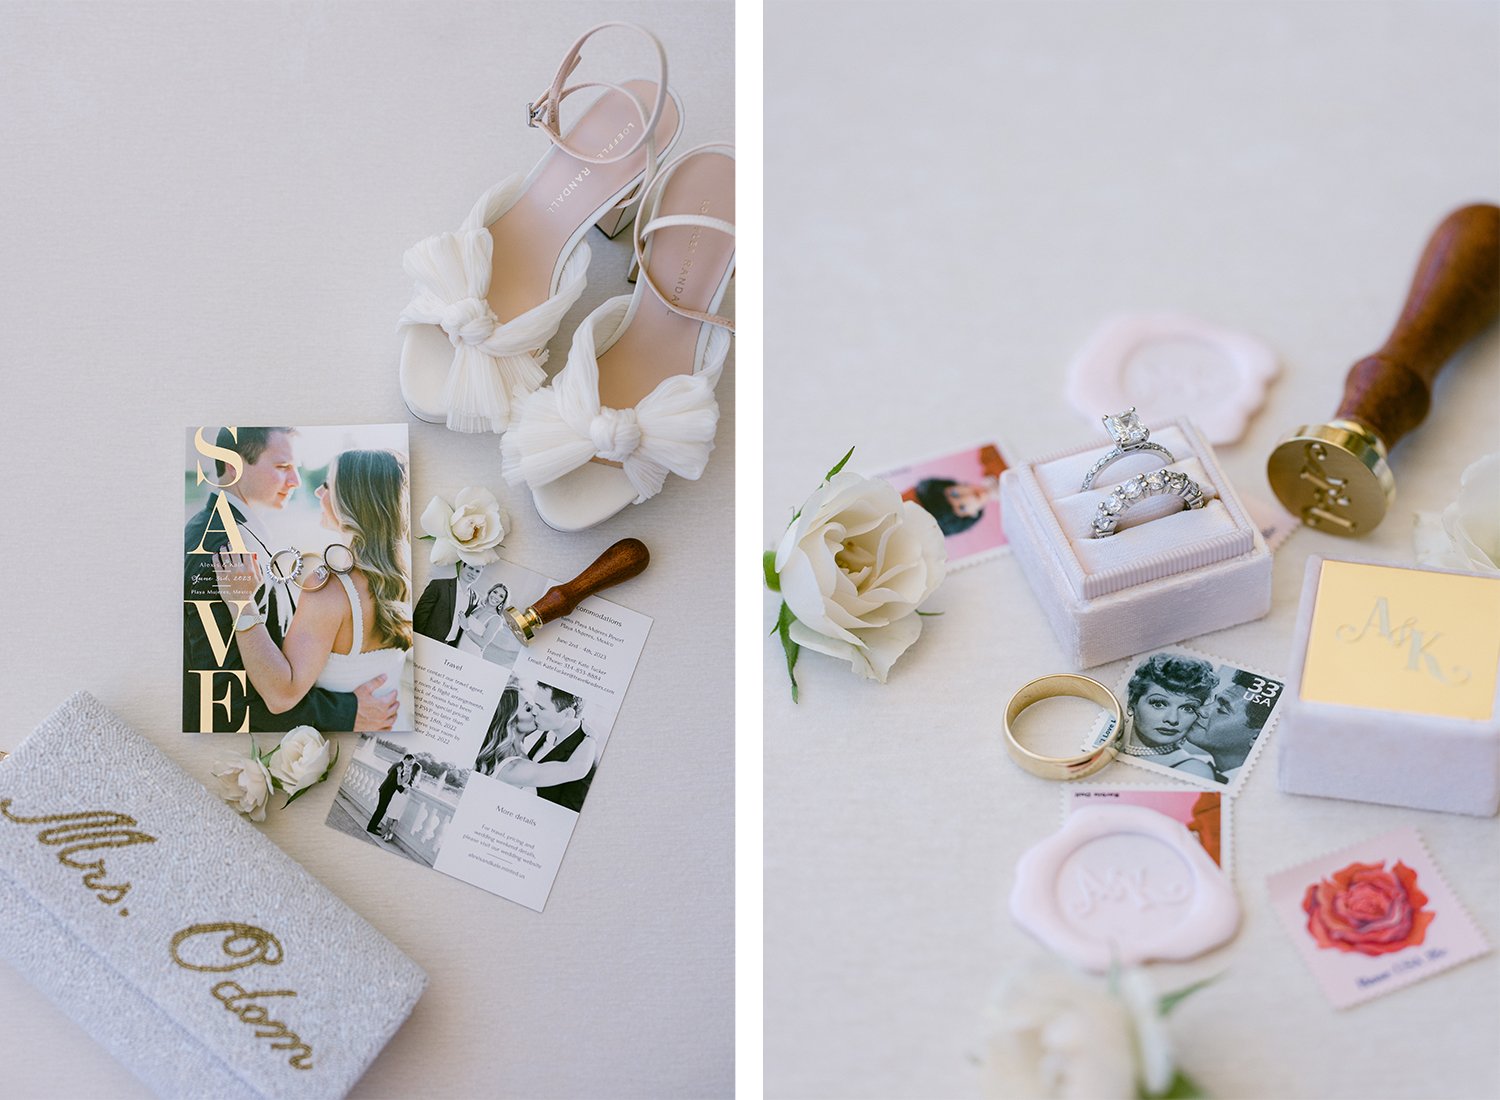 18 detail flatlay photography of bride's accesories for the wedding, postage stamps, wedding rings and candle stamps, shoes, invitation and personalized purse at Dreams Riviera Cancun.JPG